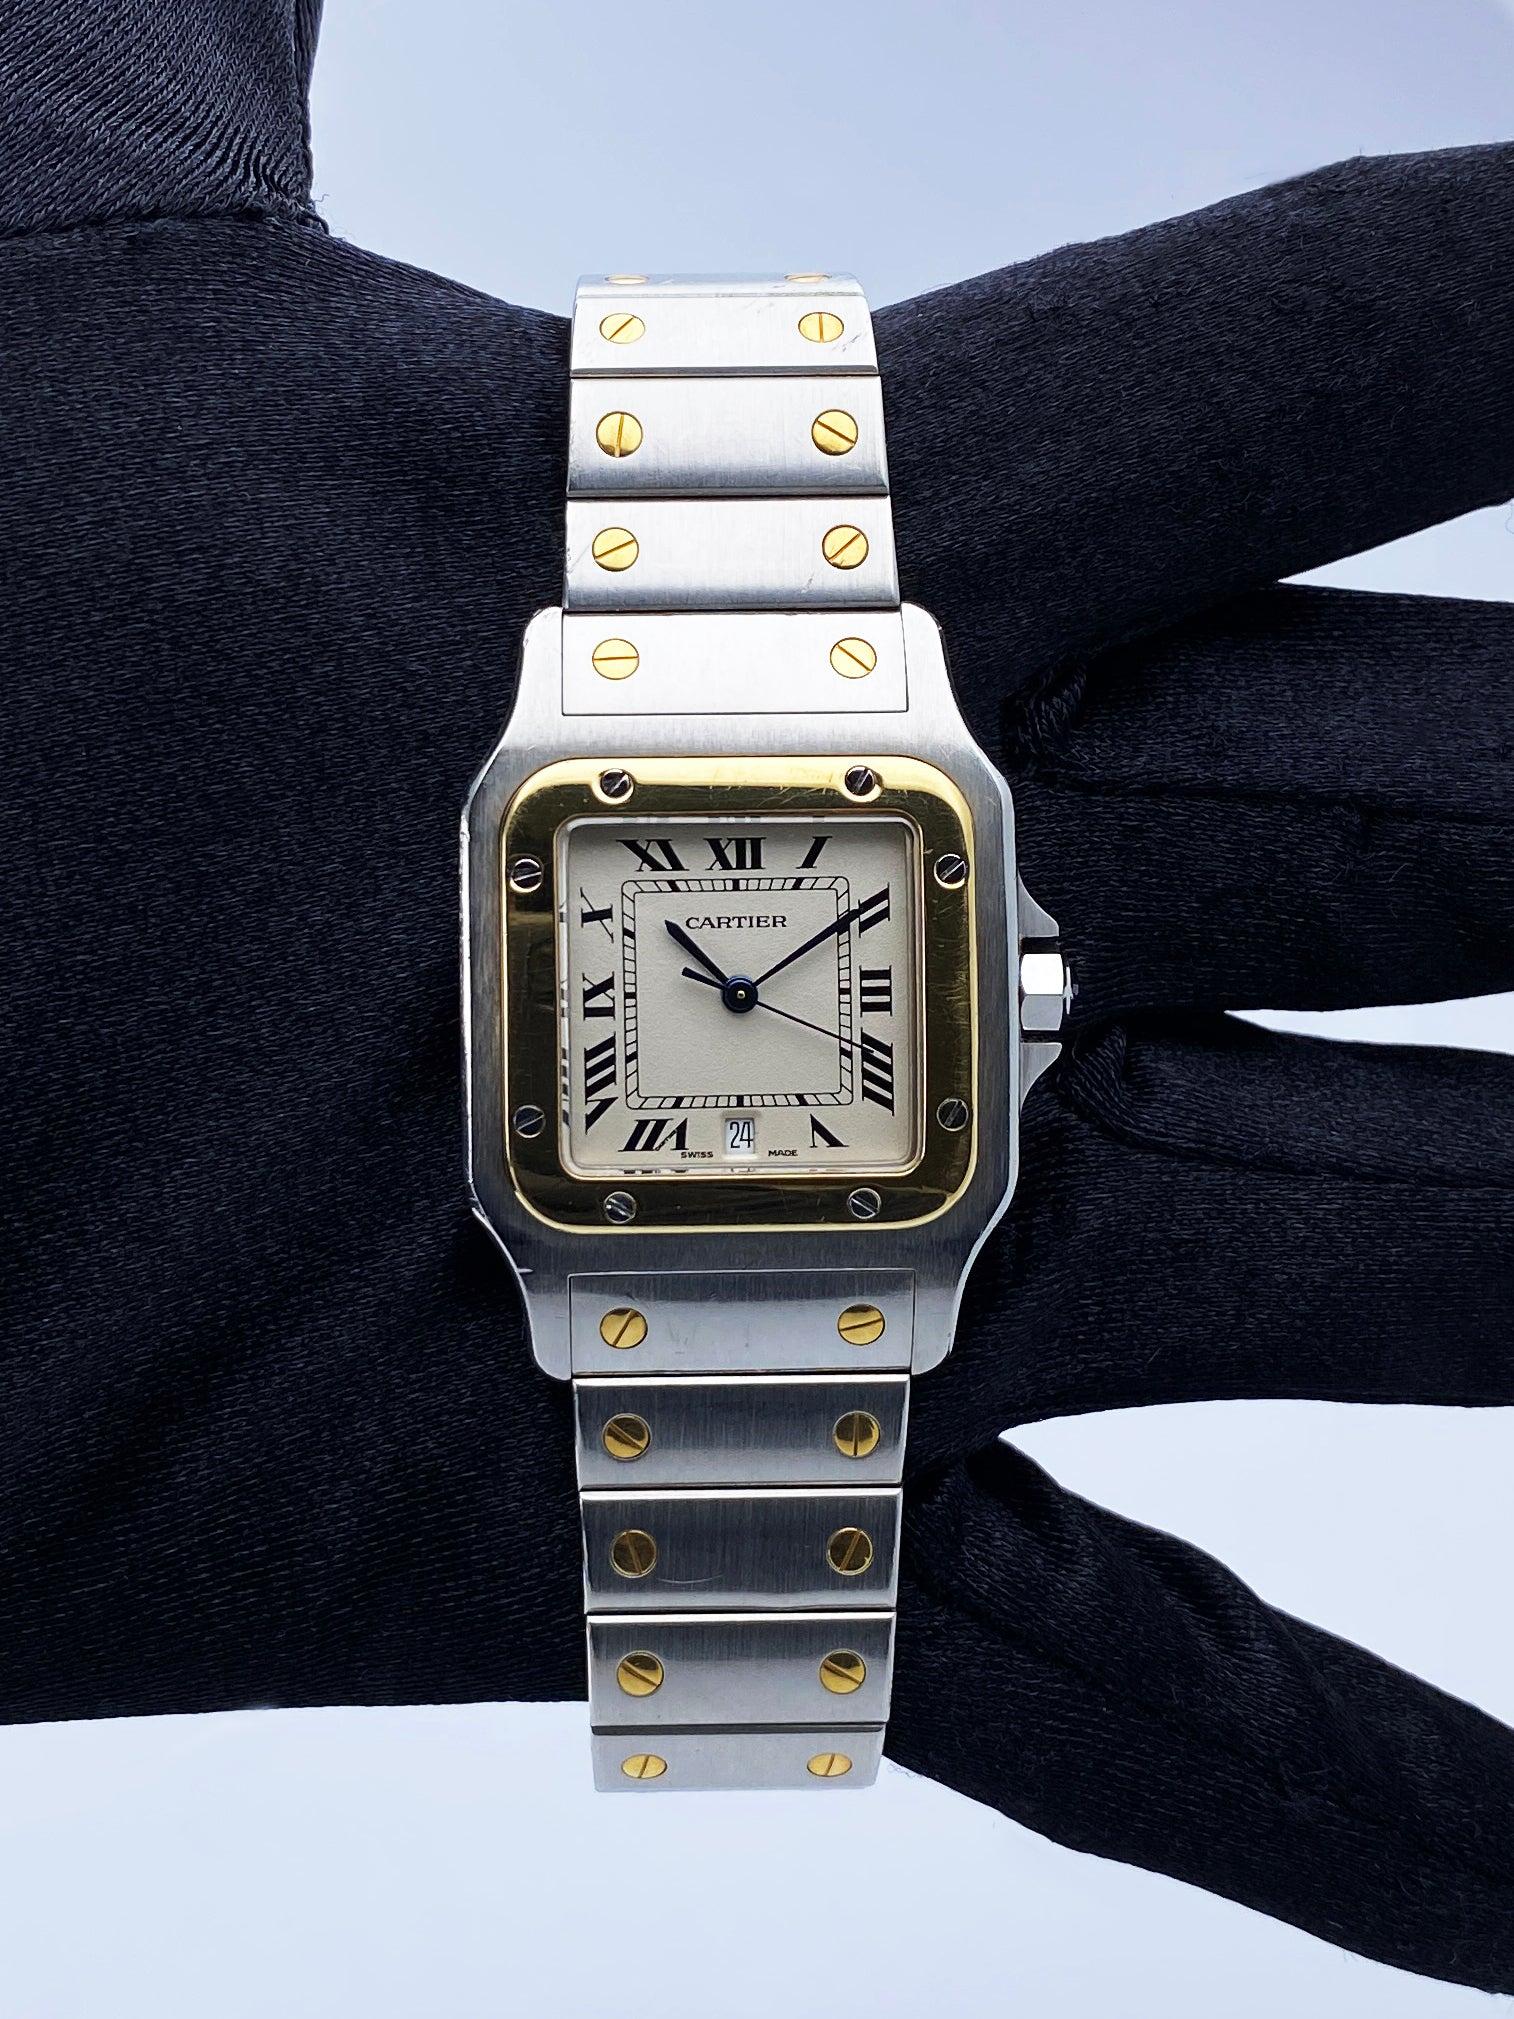 Cartier Santos Galbee Watch. 29mm stainless steel case. 18K yellow gold fixed bezel. Off-white dial with blue hands and black Roman numeral hour marker. Date display at the 6 o'clock position. Minute makers on the inner dial. 18K yellow gold and